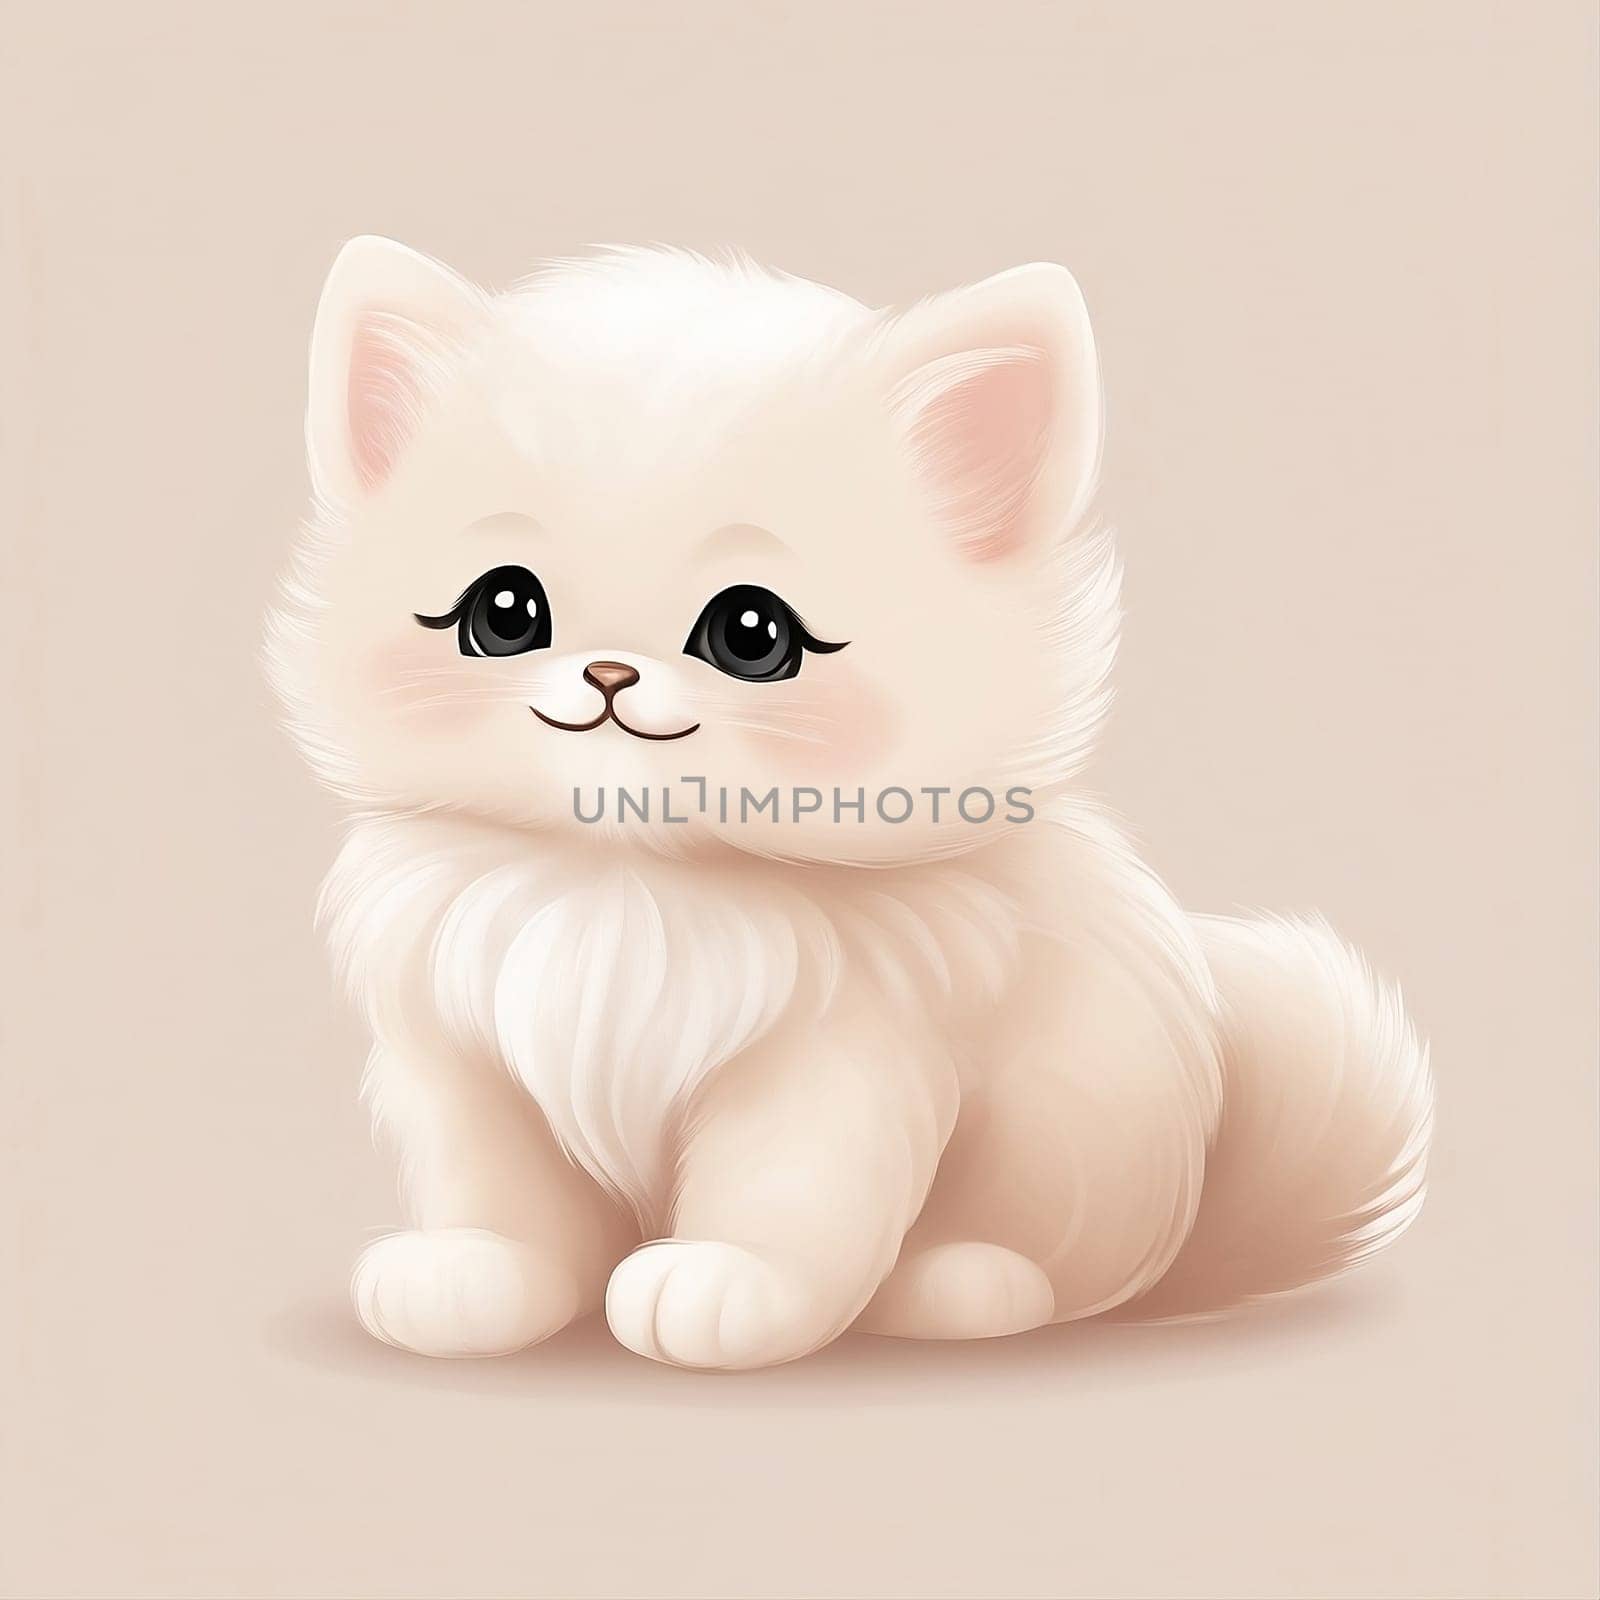 Illustration of a Cute Cartoon Cat in White Beige Color by LanaLeta